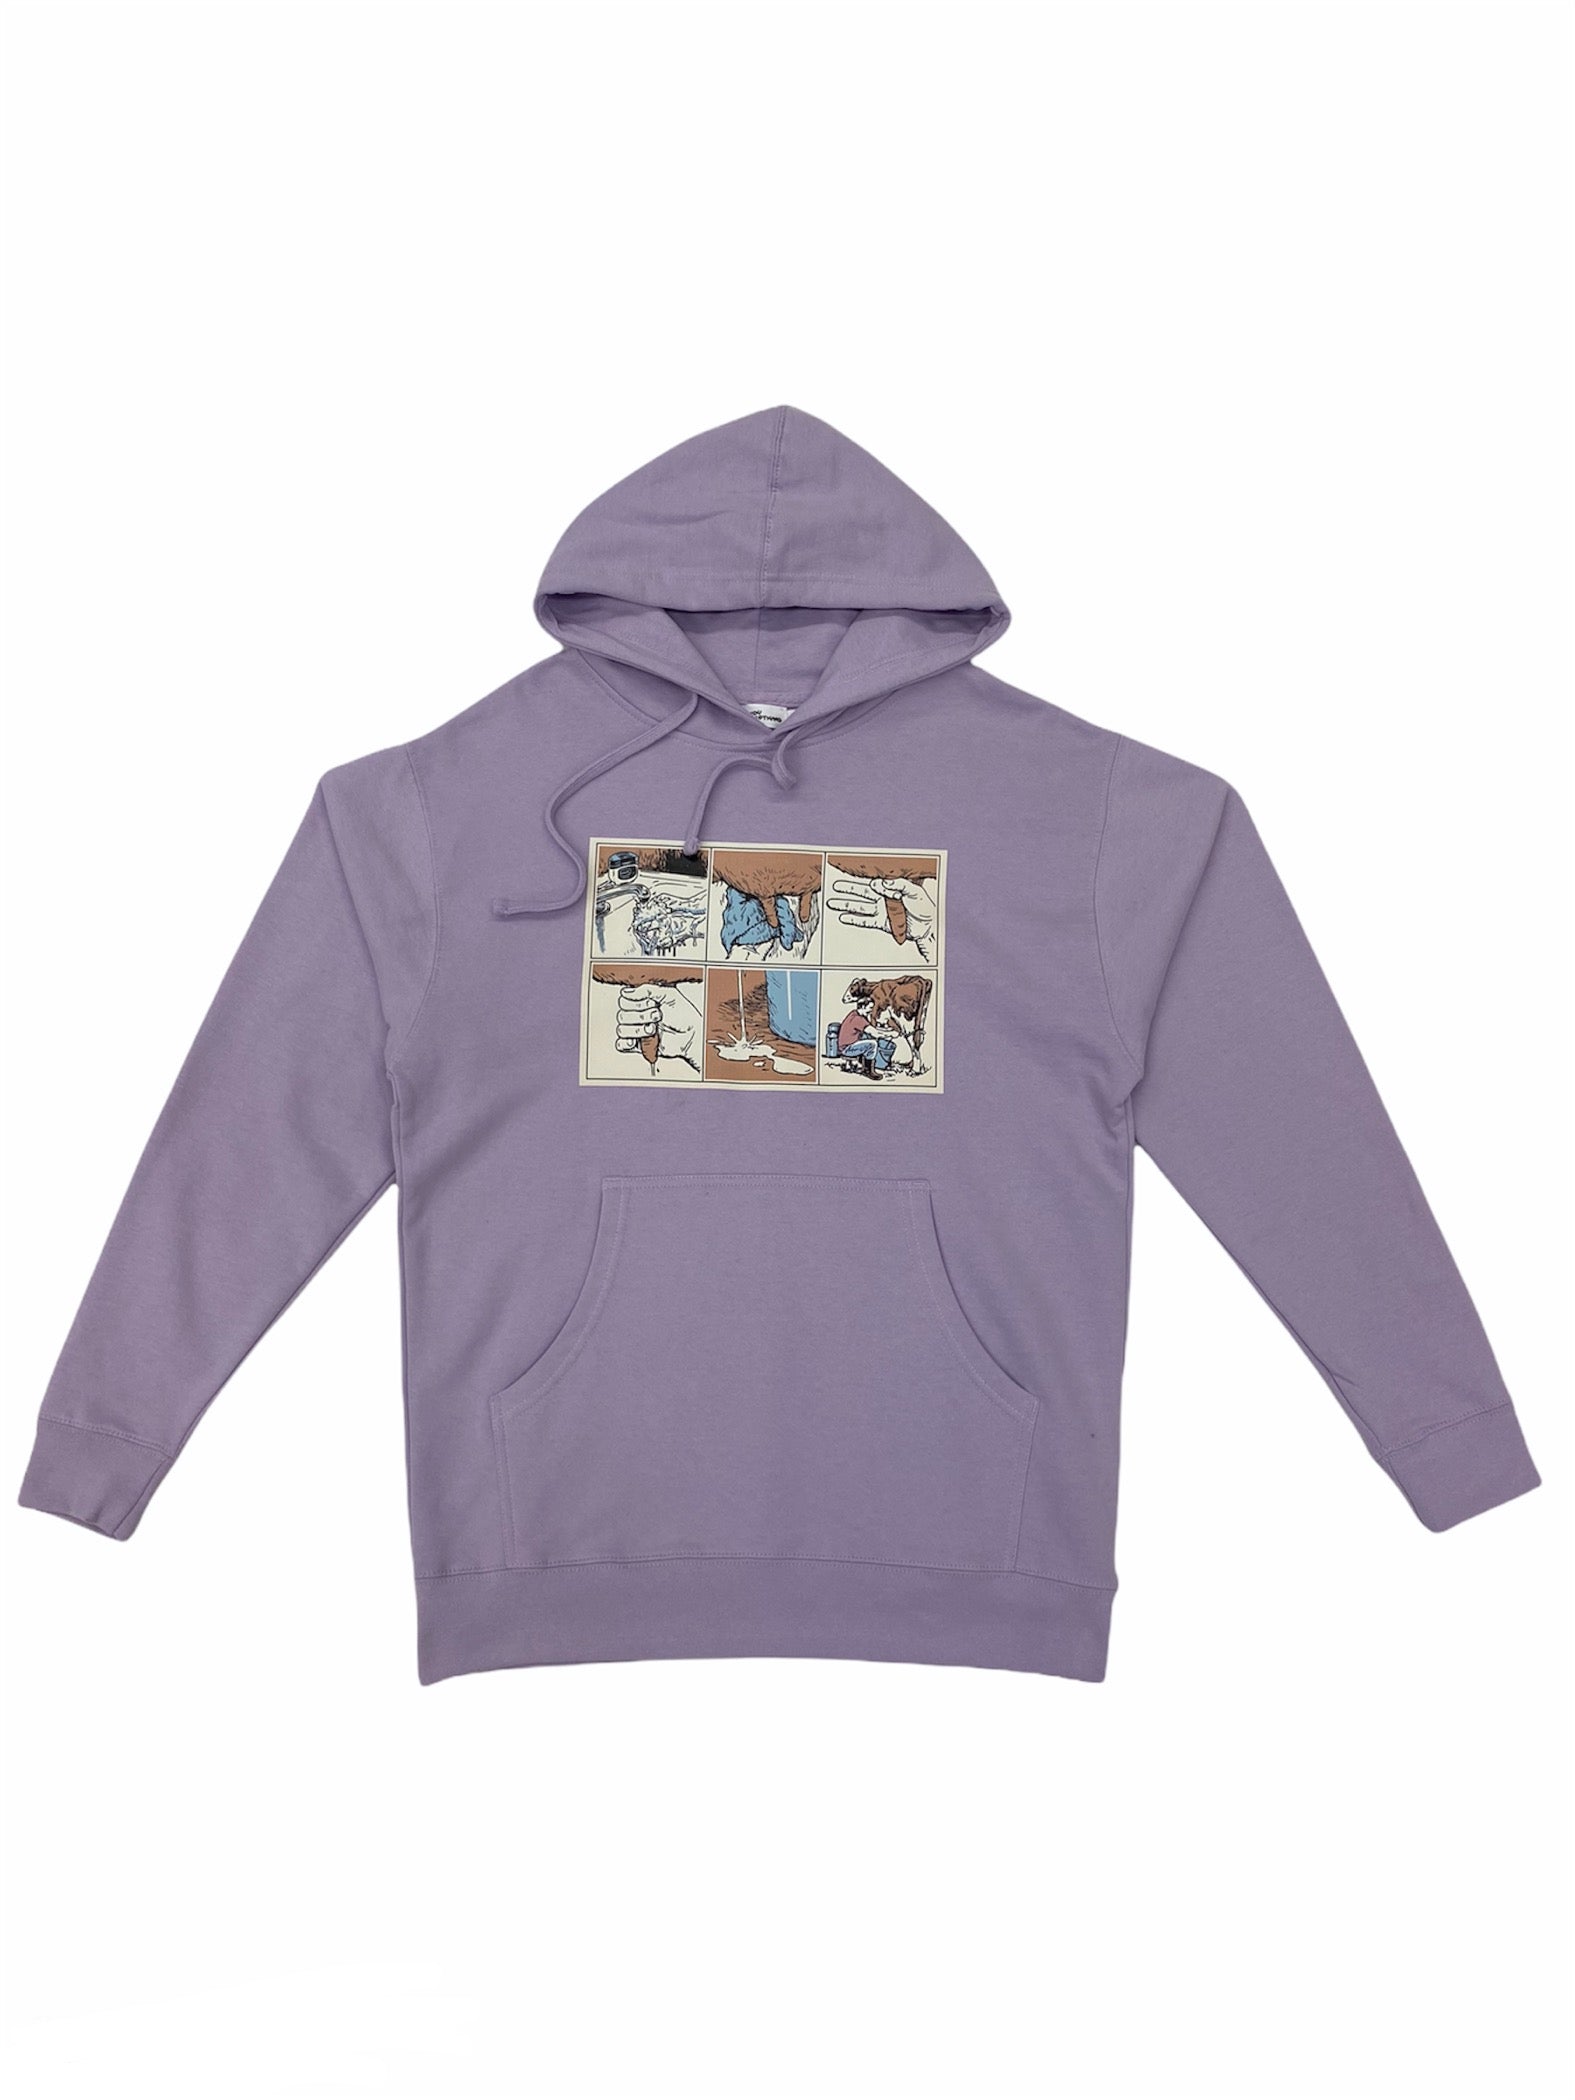 Ted's "How To" Hoodie - Lavender-Hoodie-SoYou Clothing